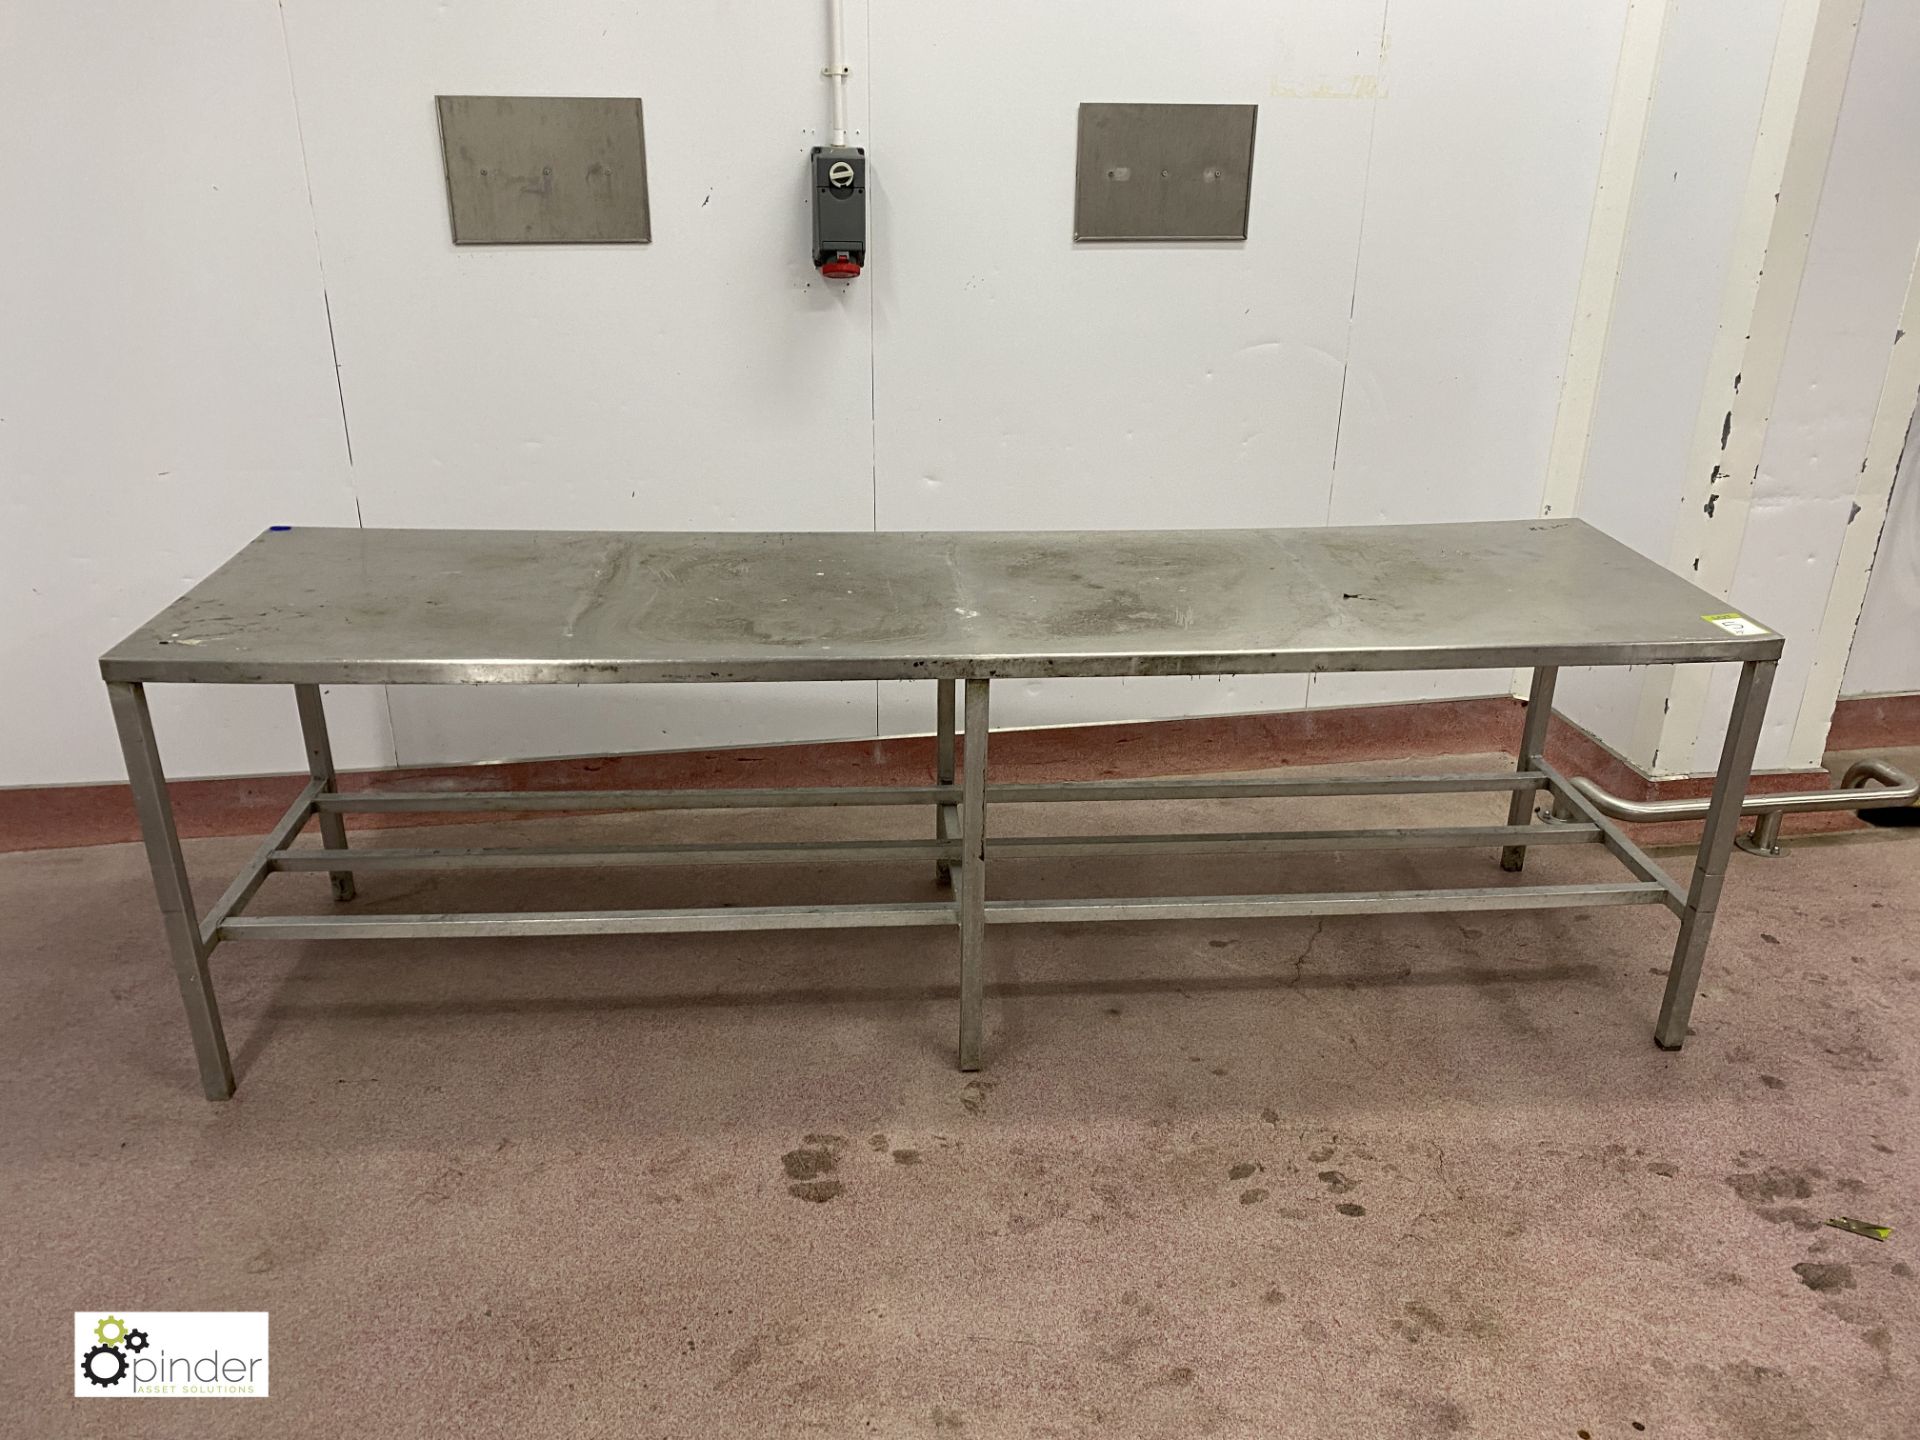 Stainless steel Preparation Table, 2740mm x 770mm x 840mm (please note there is a lift out fee of £5 - Image 2 of 3